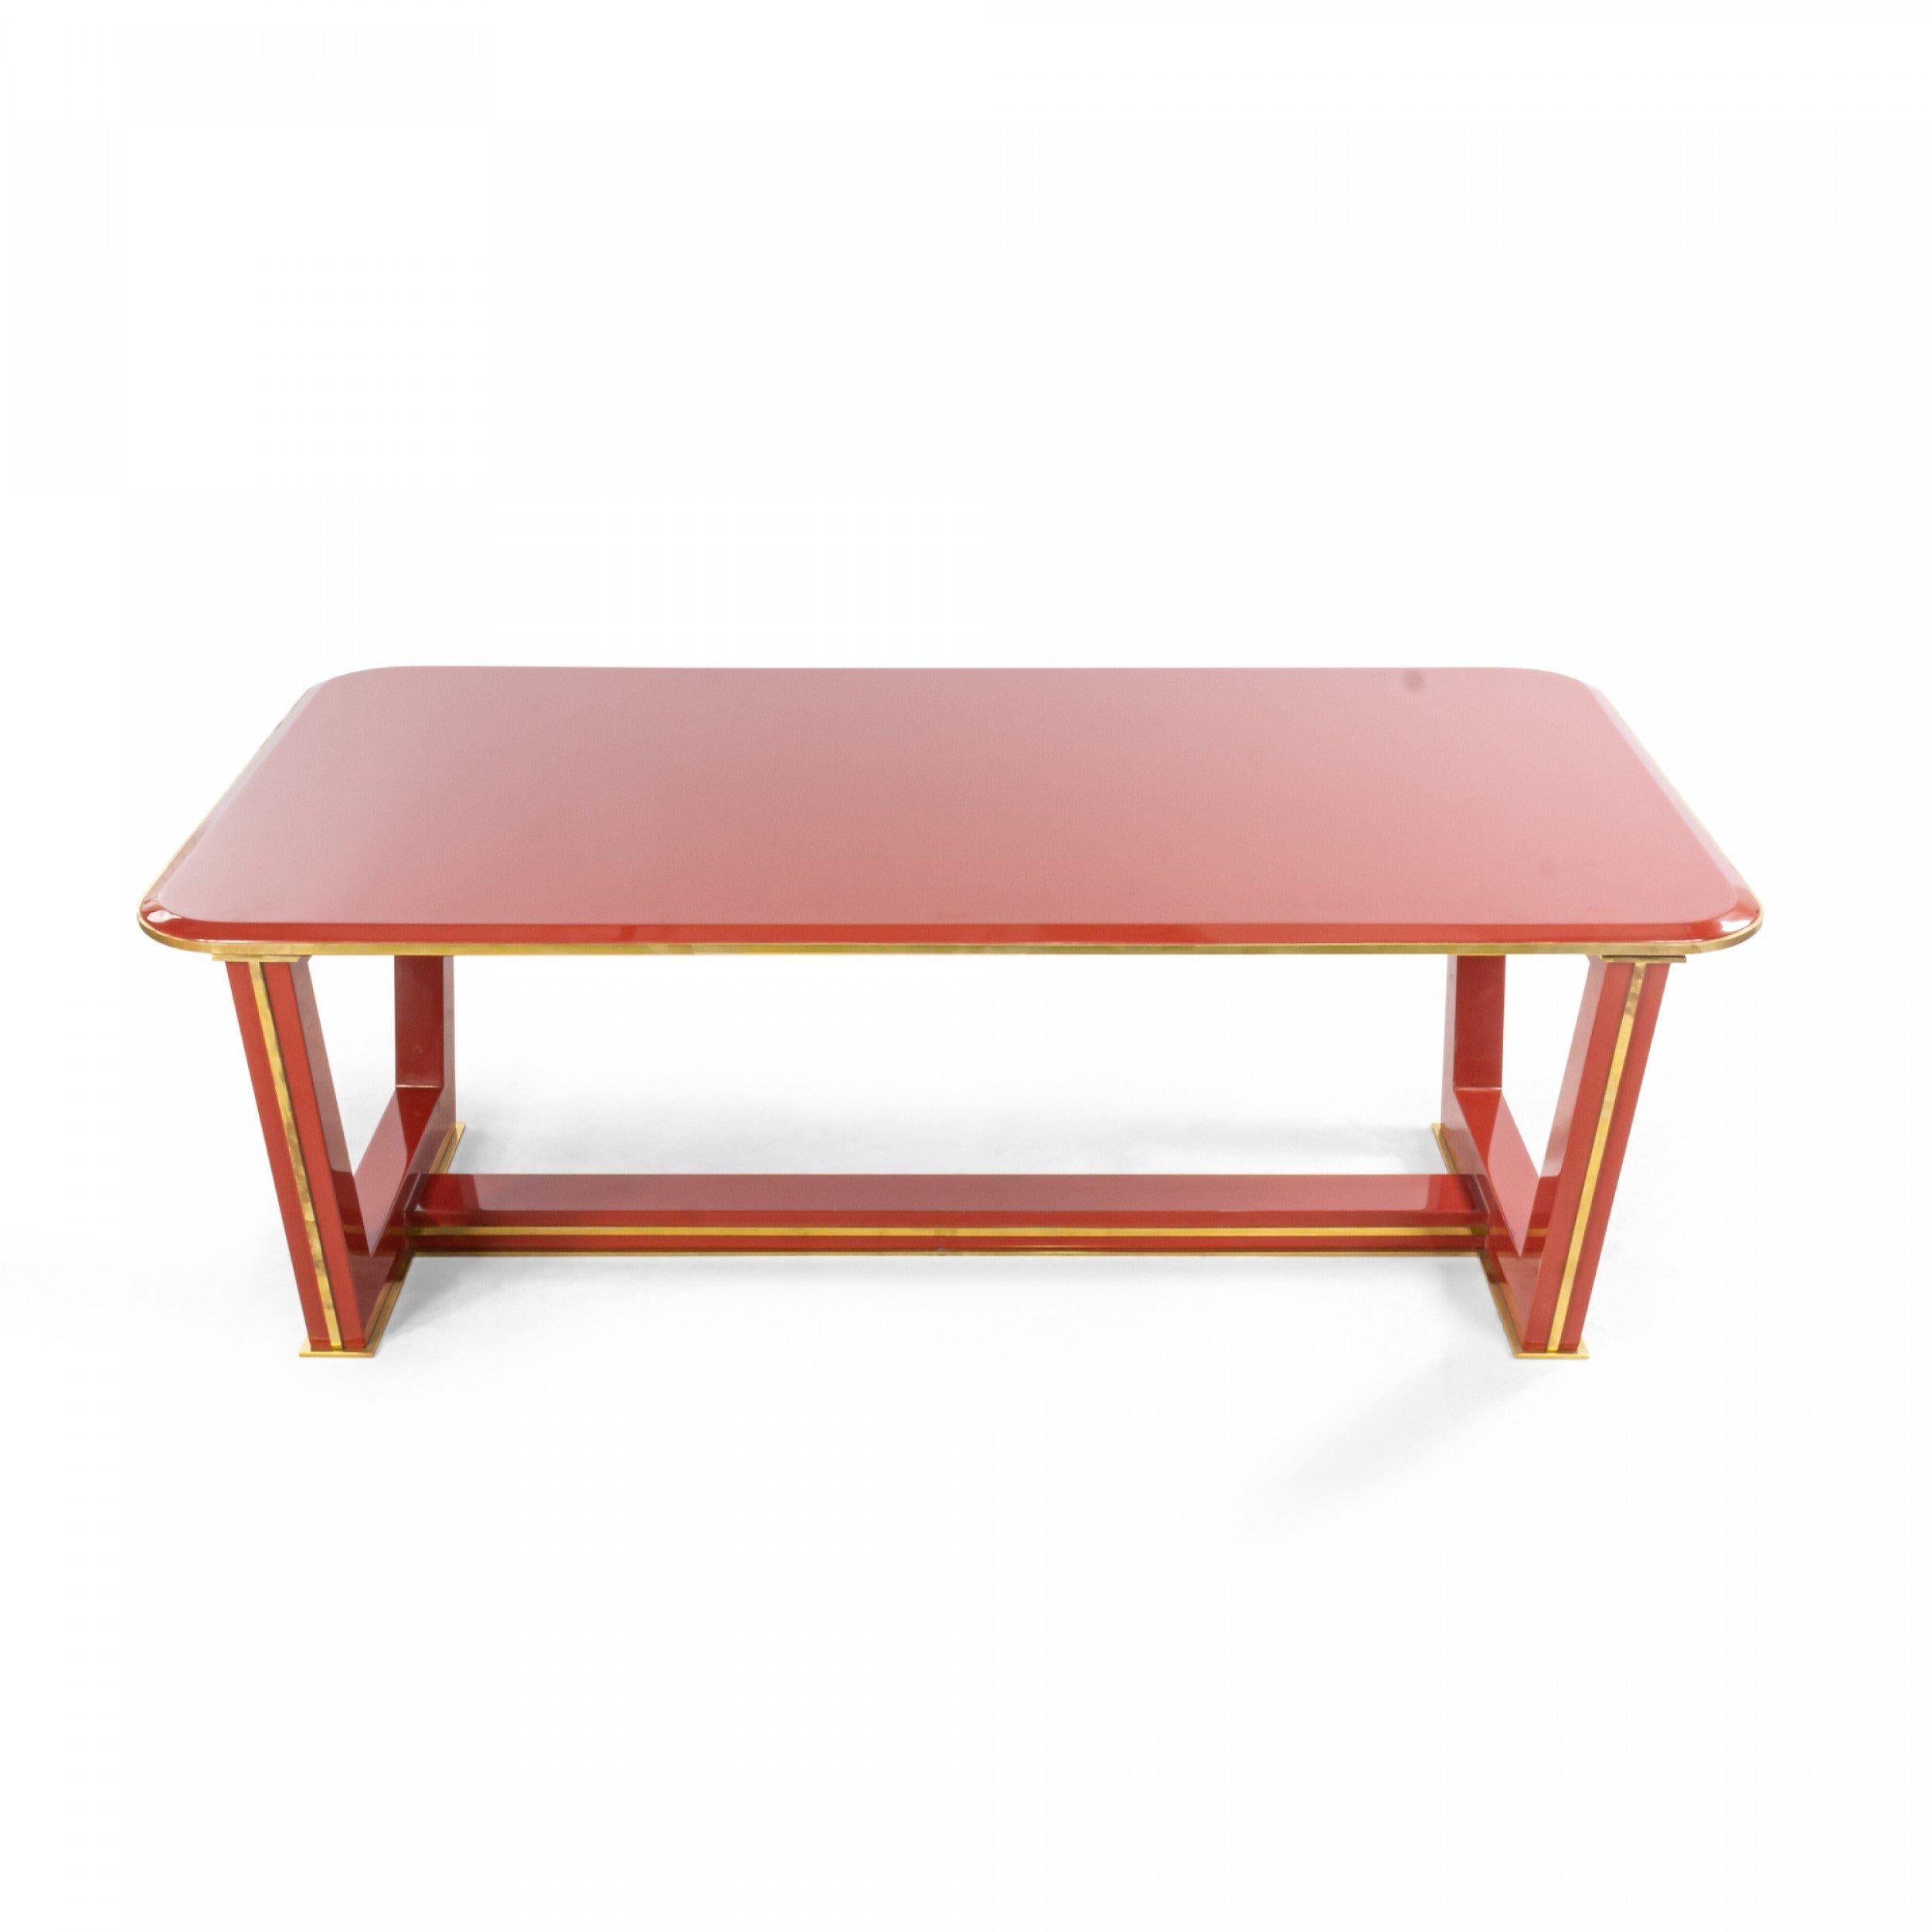 French 1940s style (modern) brass trim and red lacquered coffee table with a rounded corner rectangular top over 4 legs and stretcher.